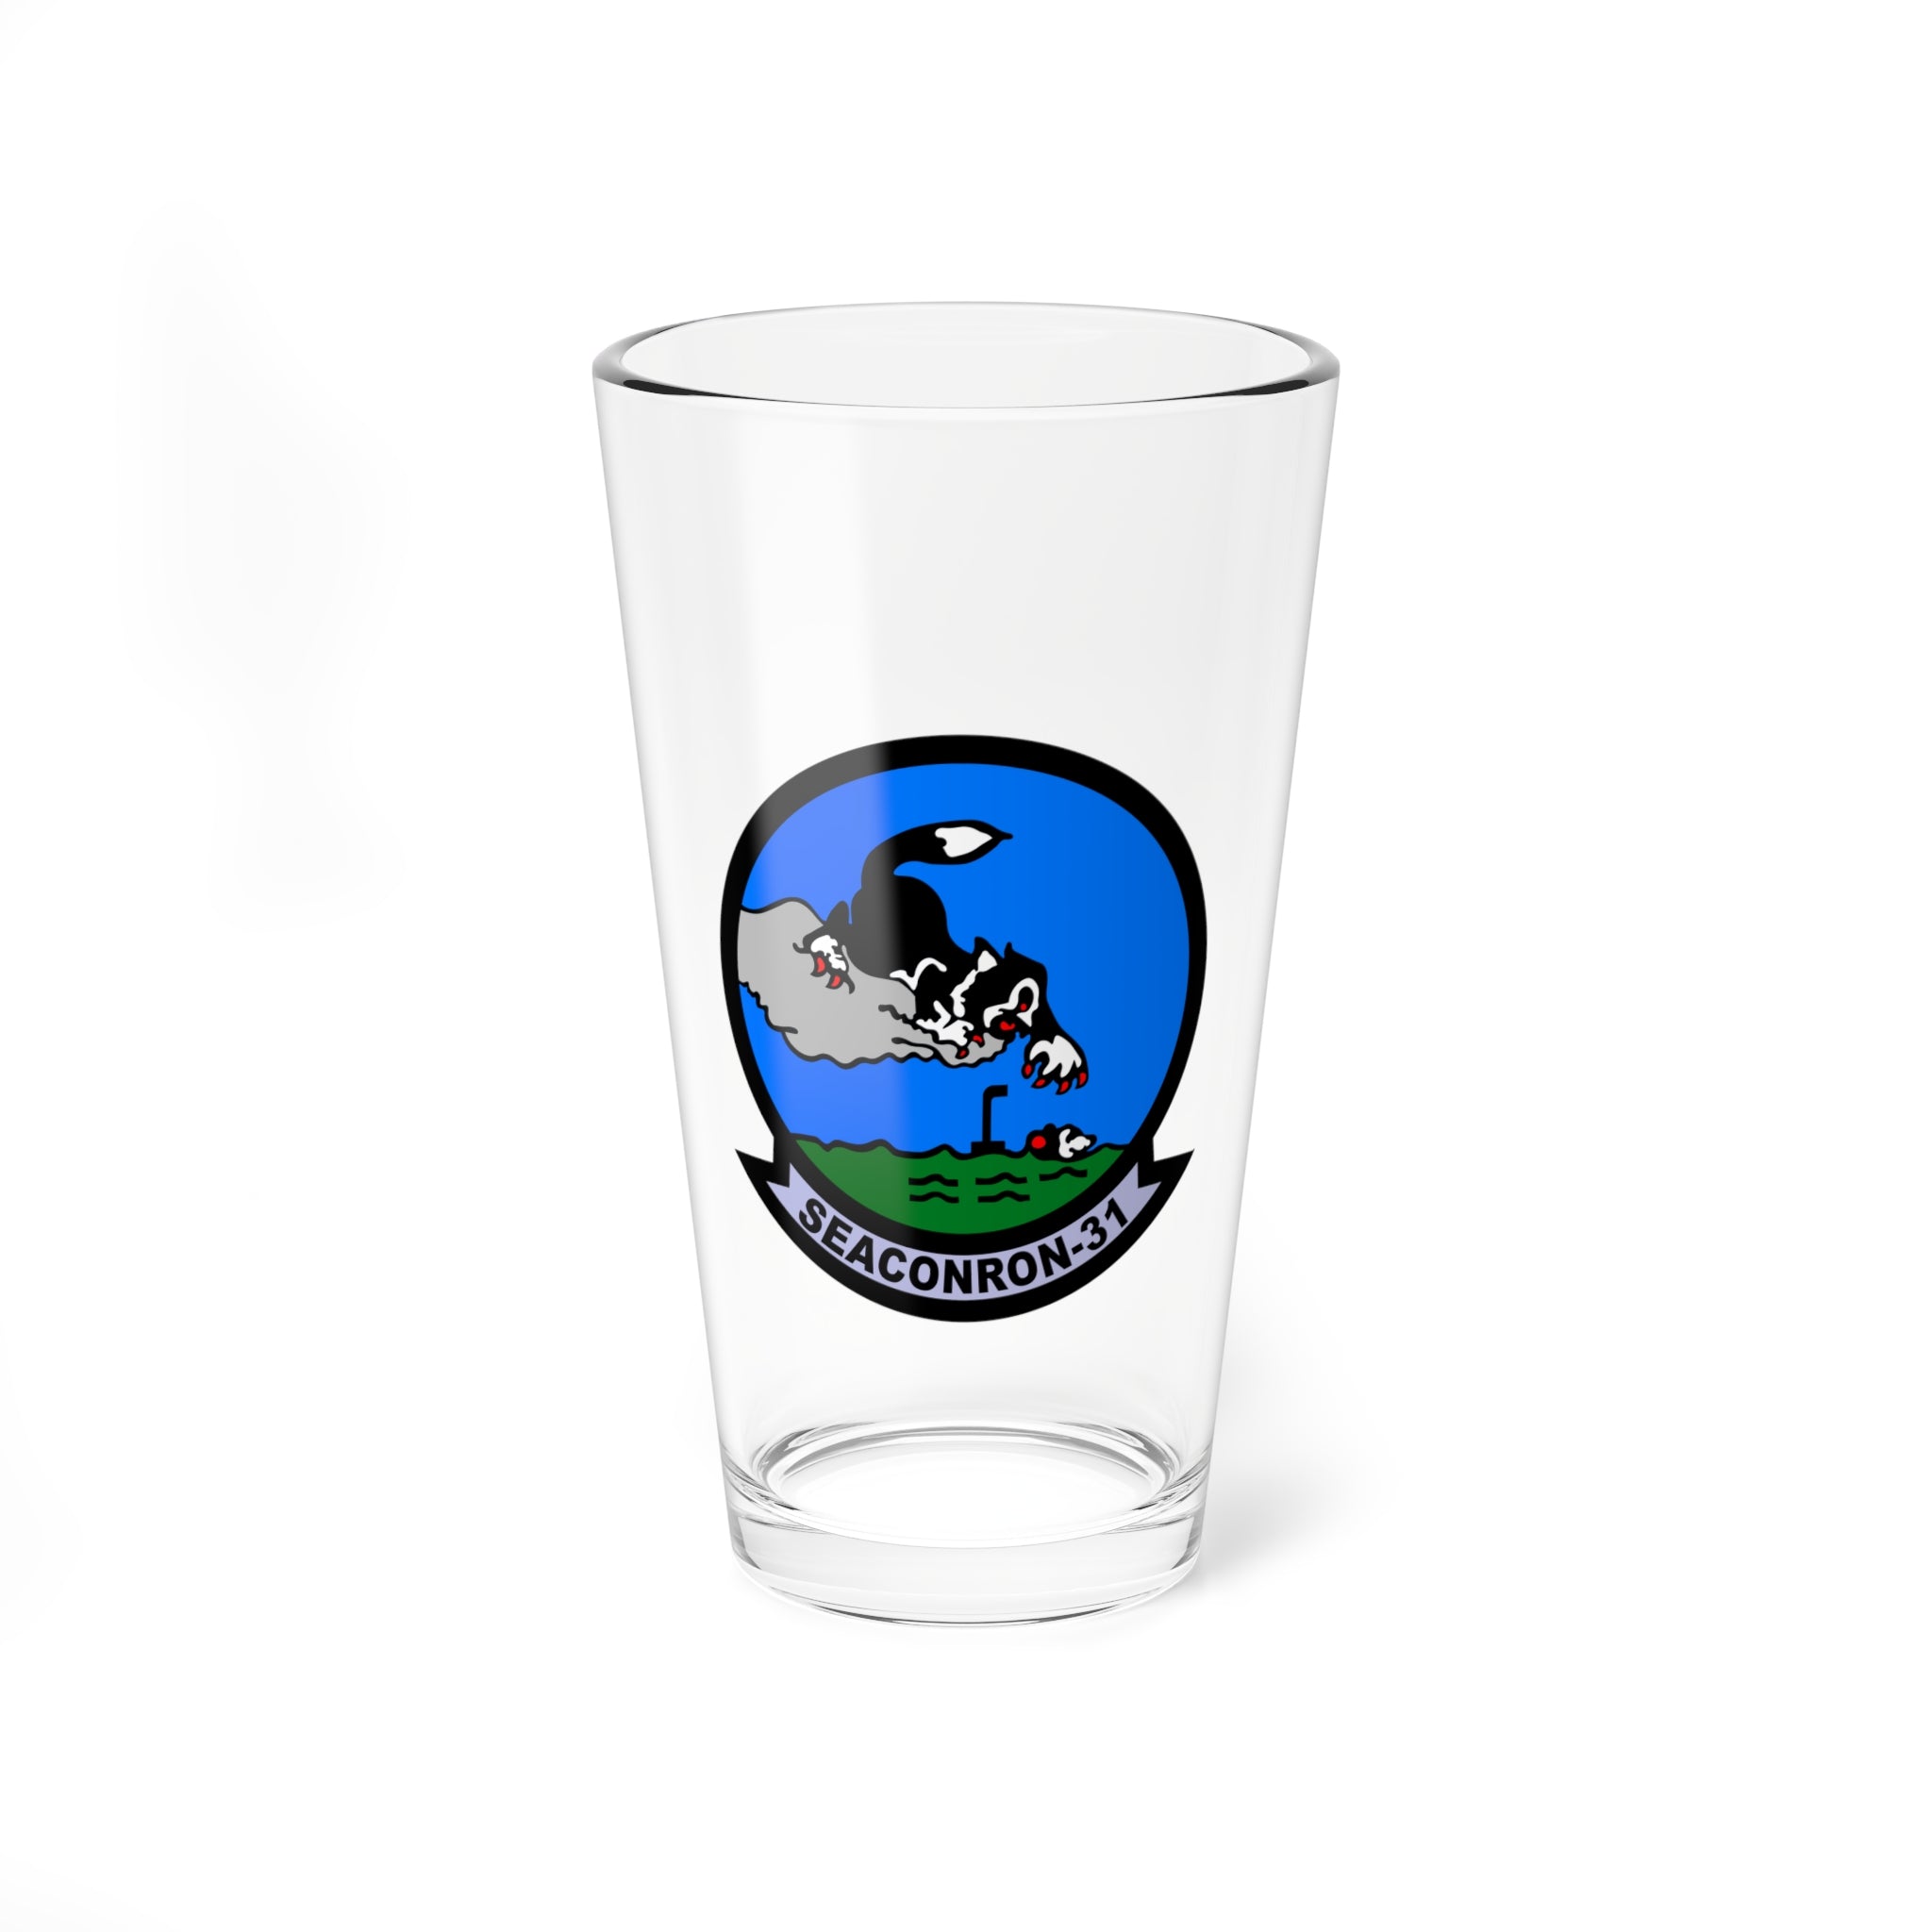 VS-31 "Topcats" Pint Glass US Navy Sea Control Squadron flying the S_3 Viking for retieed and veteran Sailors